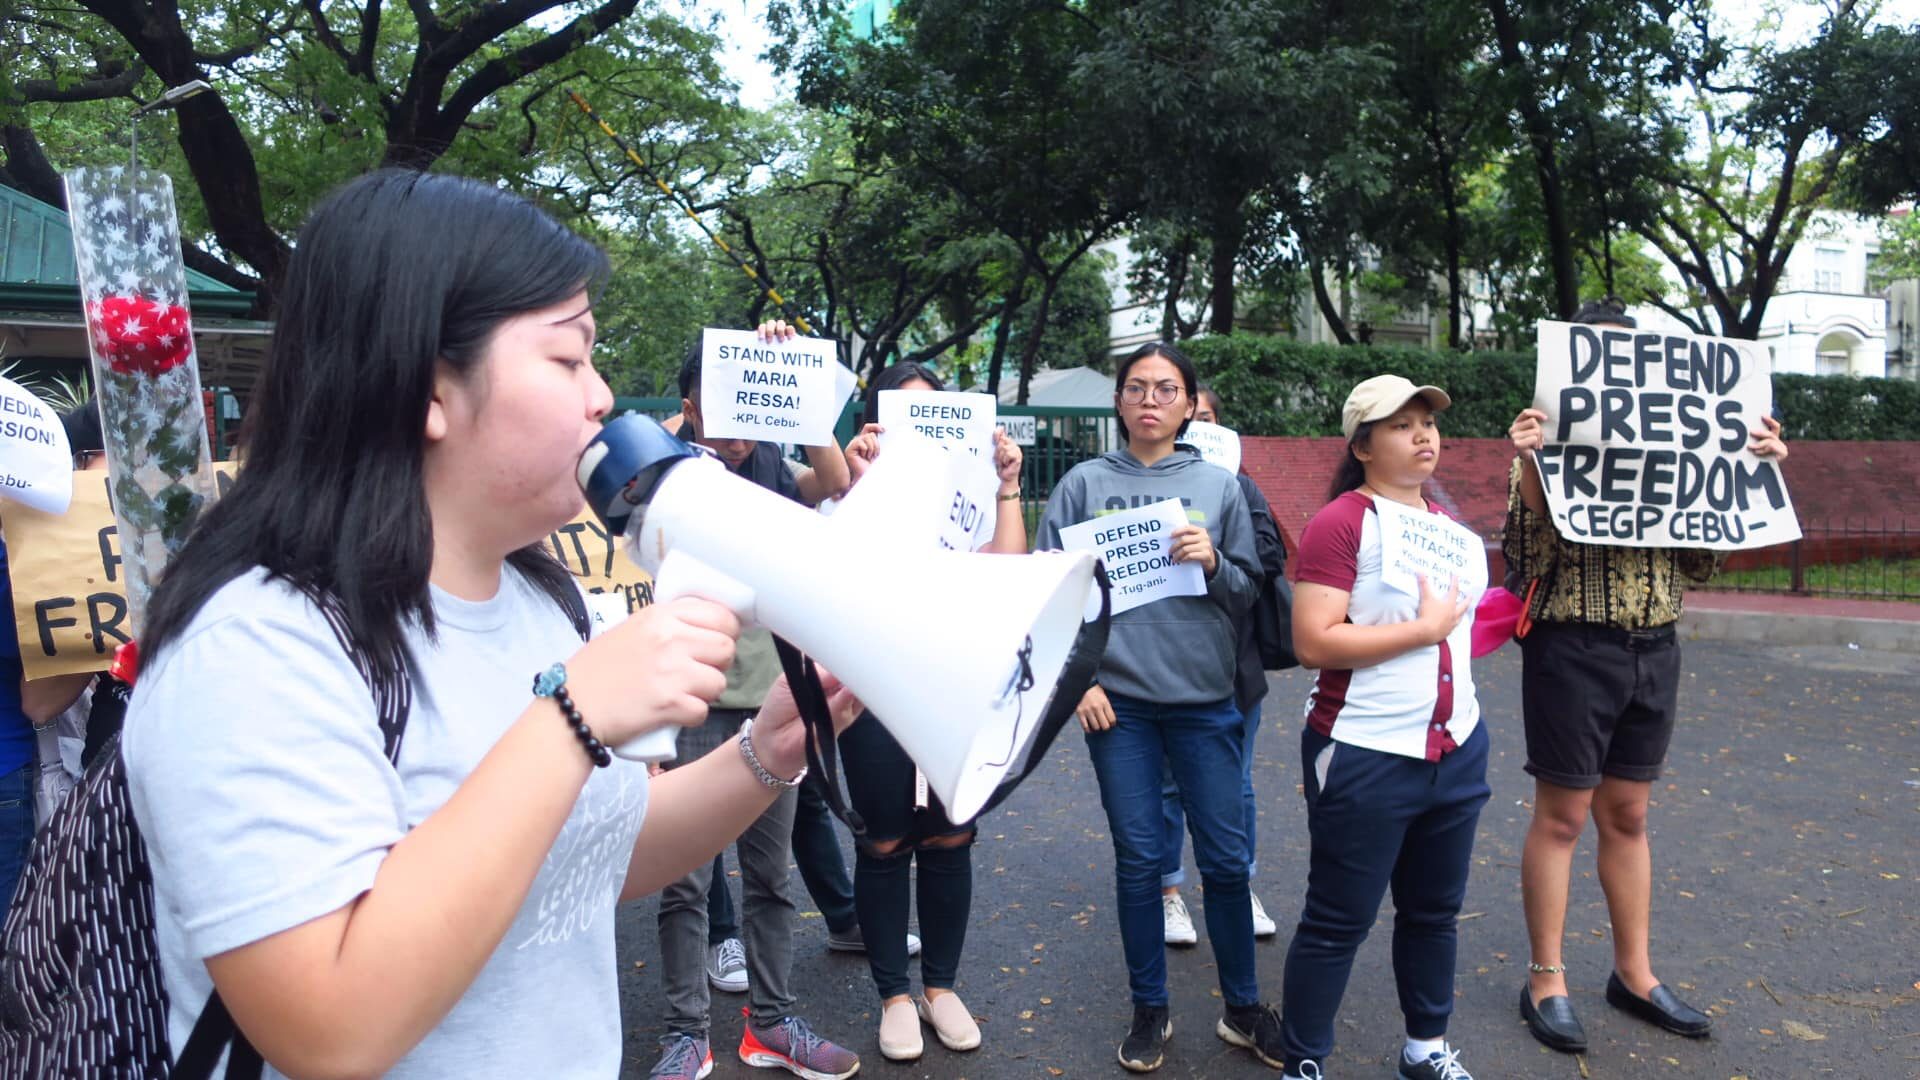 STOP THE ATTACKS. CEGP Cebu holds a protest action at the UP Cebu entrance gate to urge people to stand with Maria Ressa on February 14, 2019. Photo from CEGP Cebu 